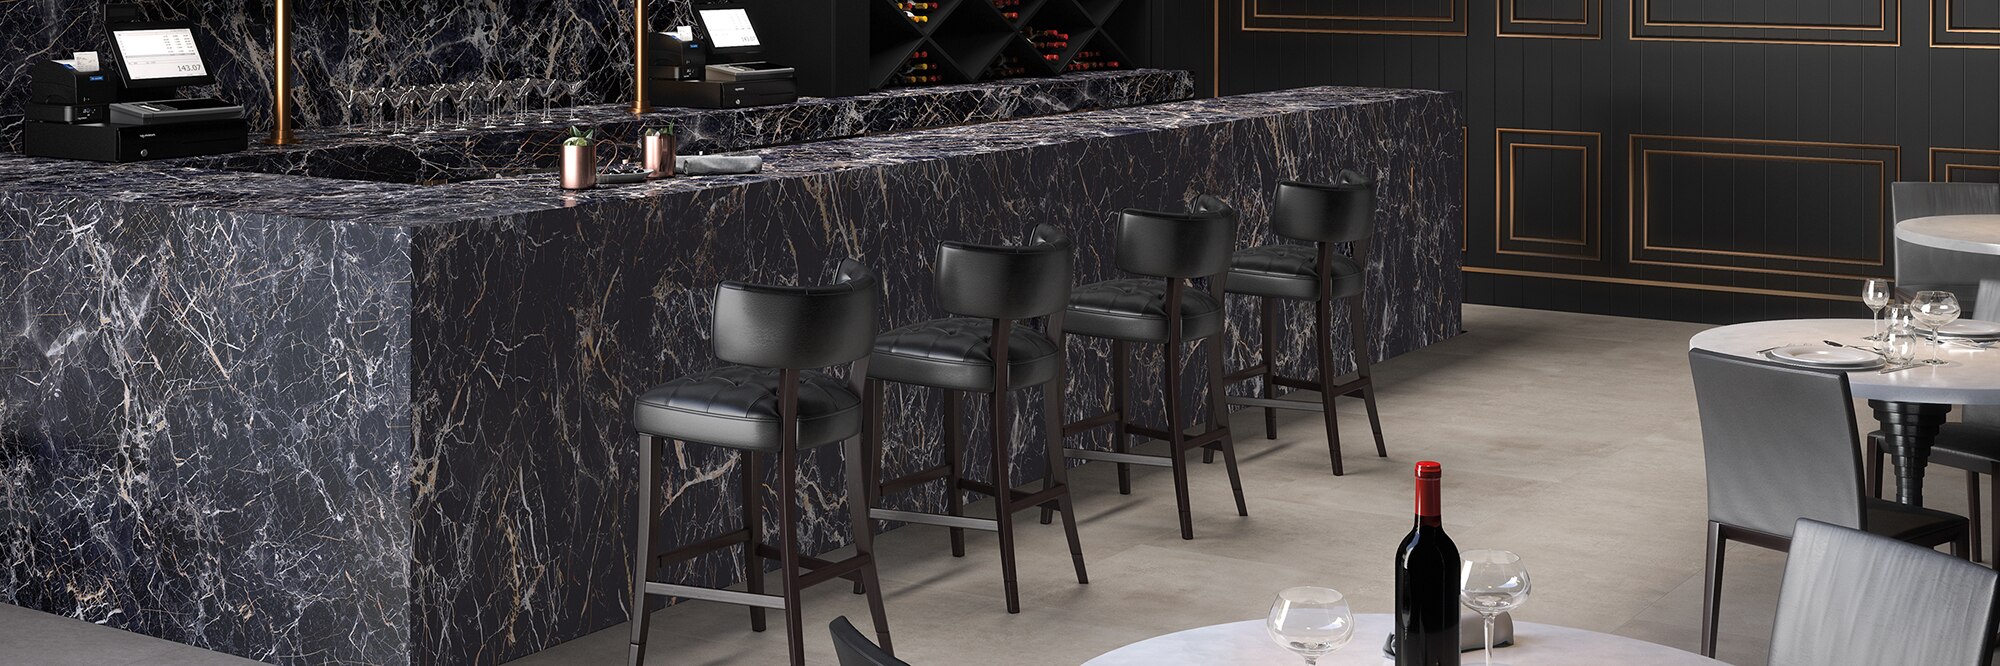 Restaurant bar with black with white veining porcelain slab on the wall, bar top and front, and gray stone look flooring tiles.